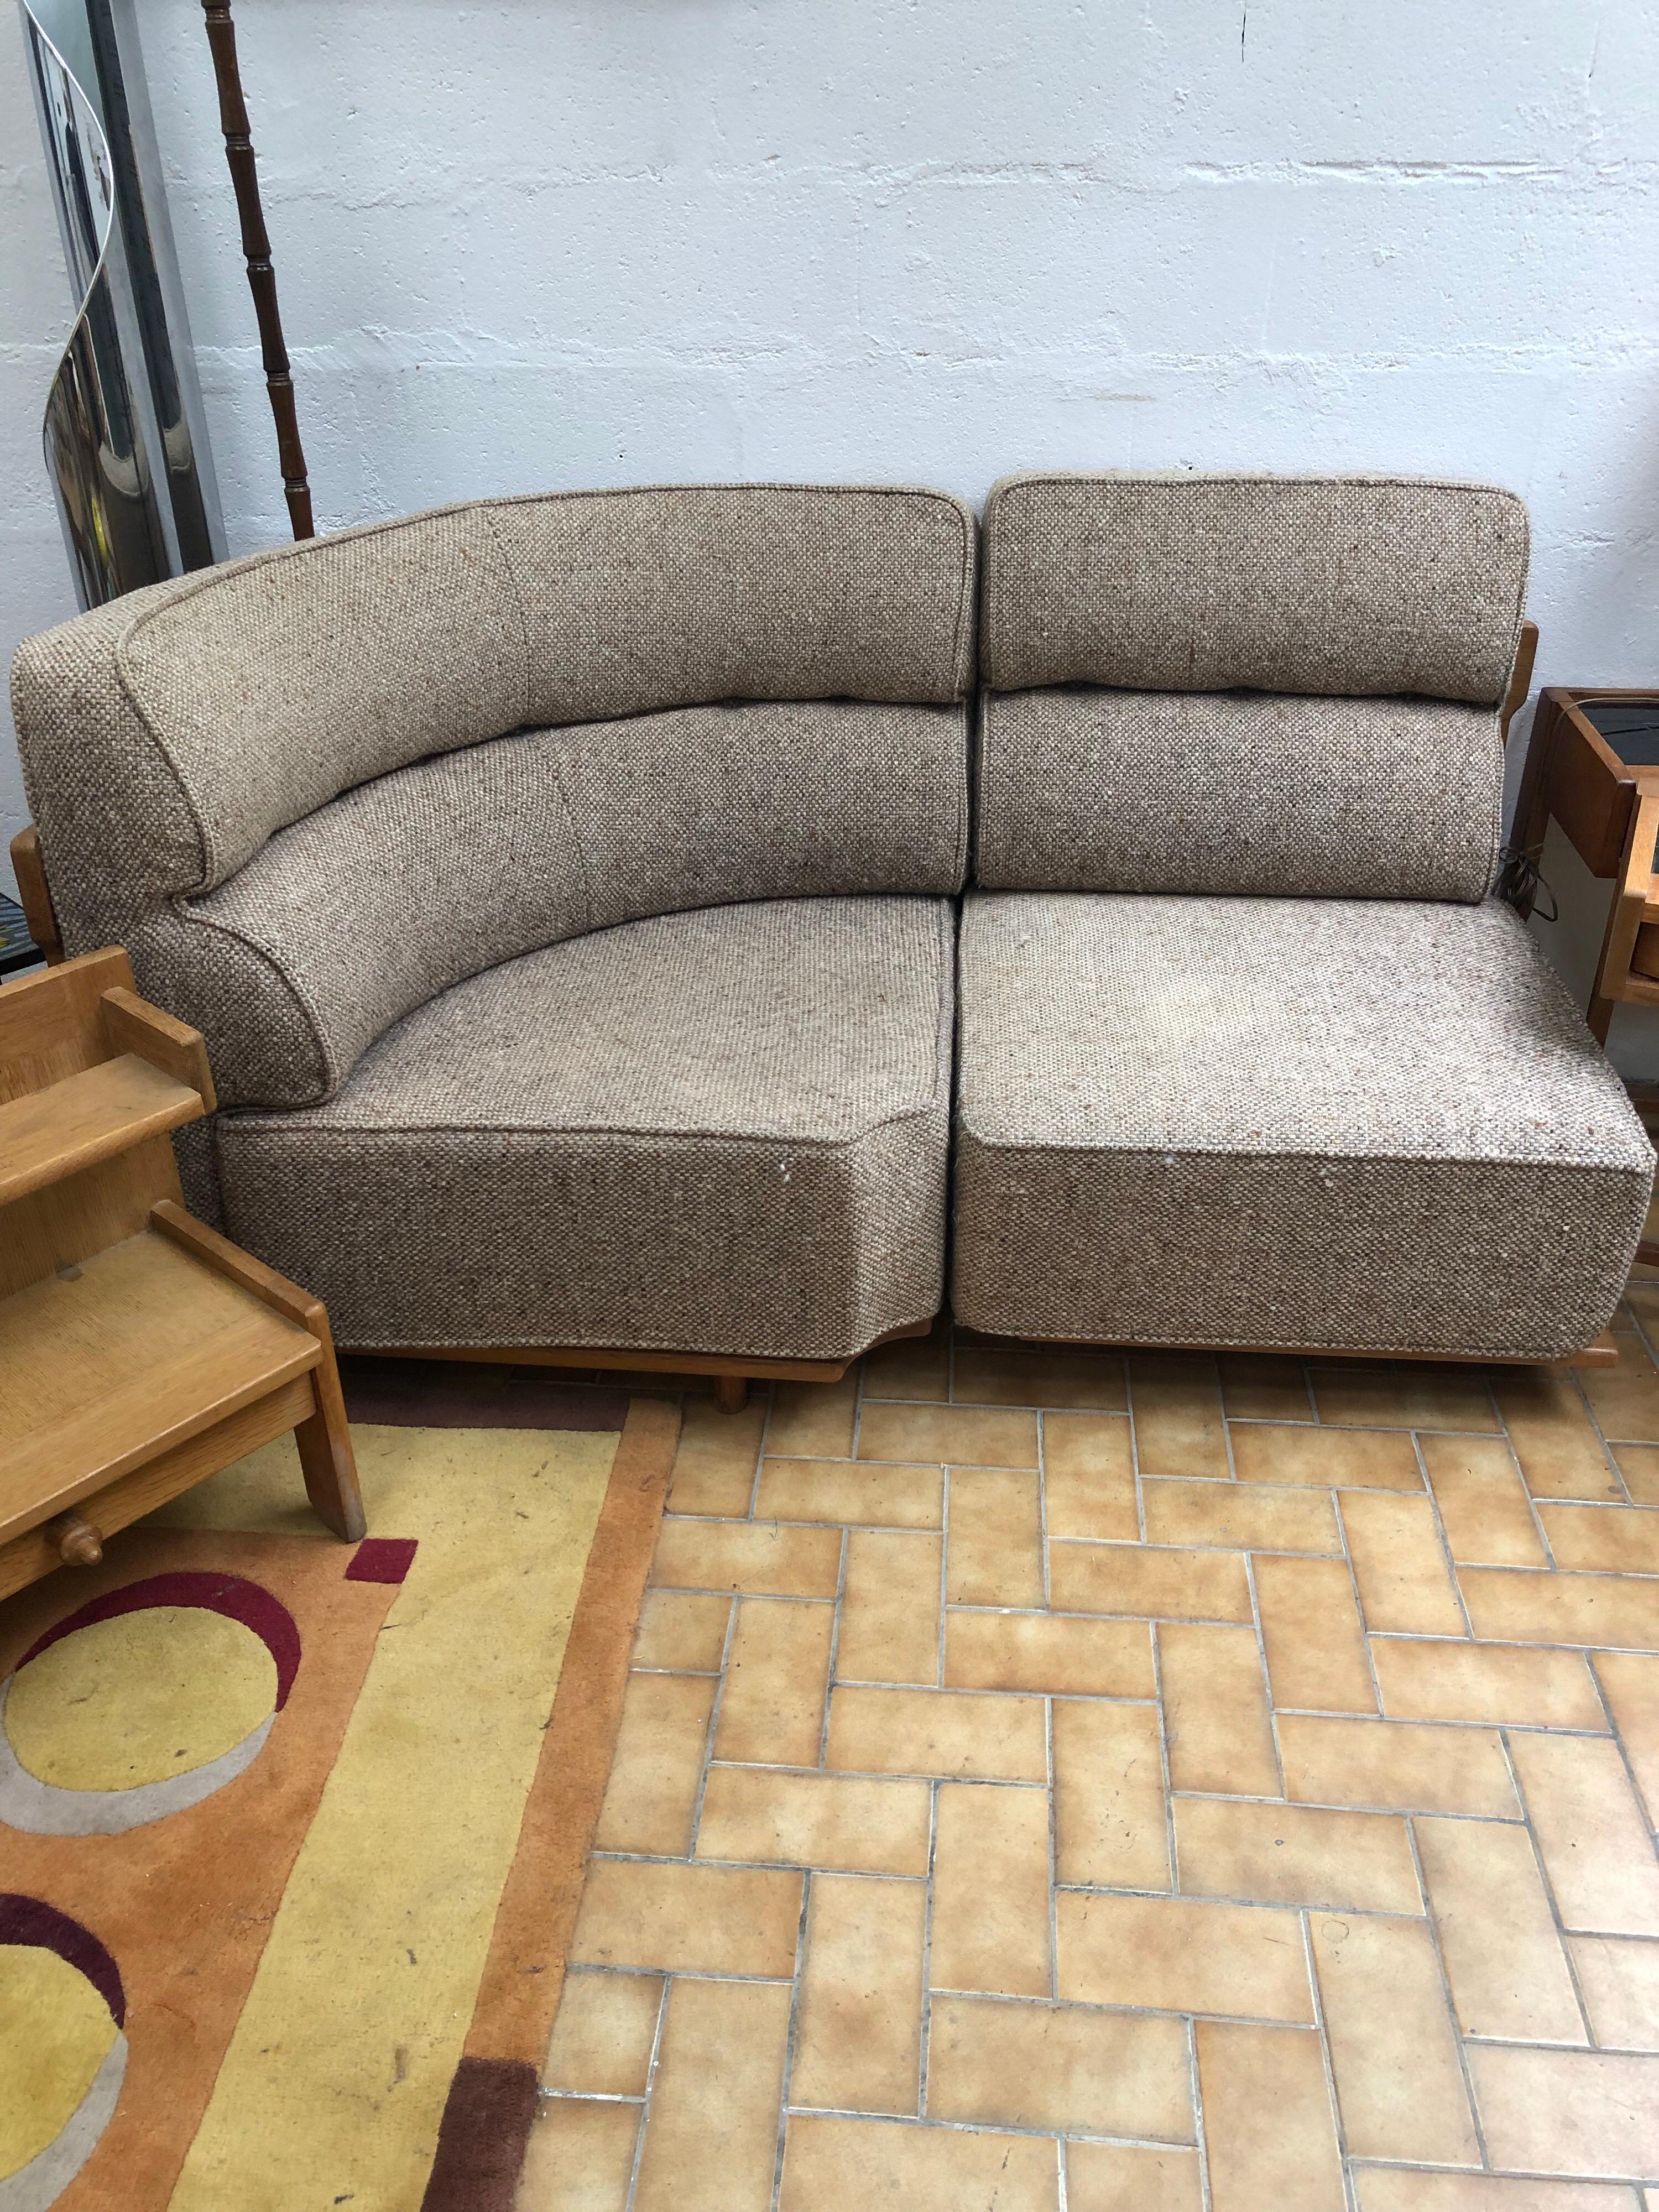 4 armchairs could be separate of be a sofa oak and fabric, circa 1960.